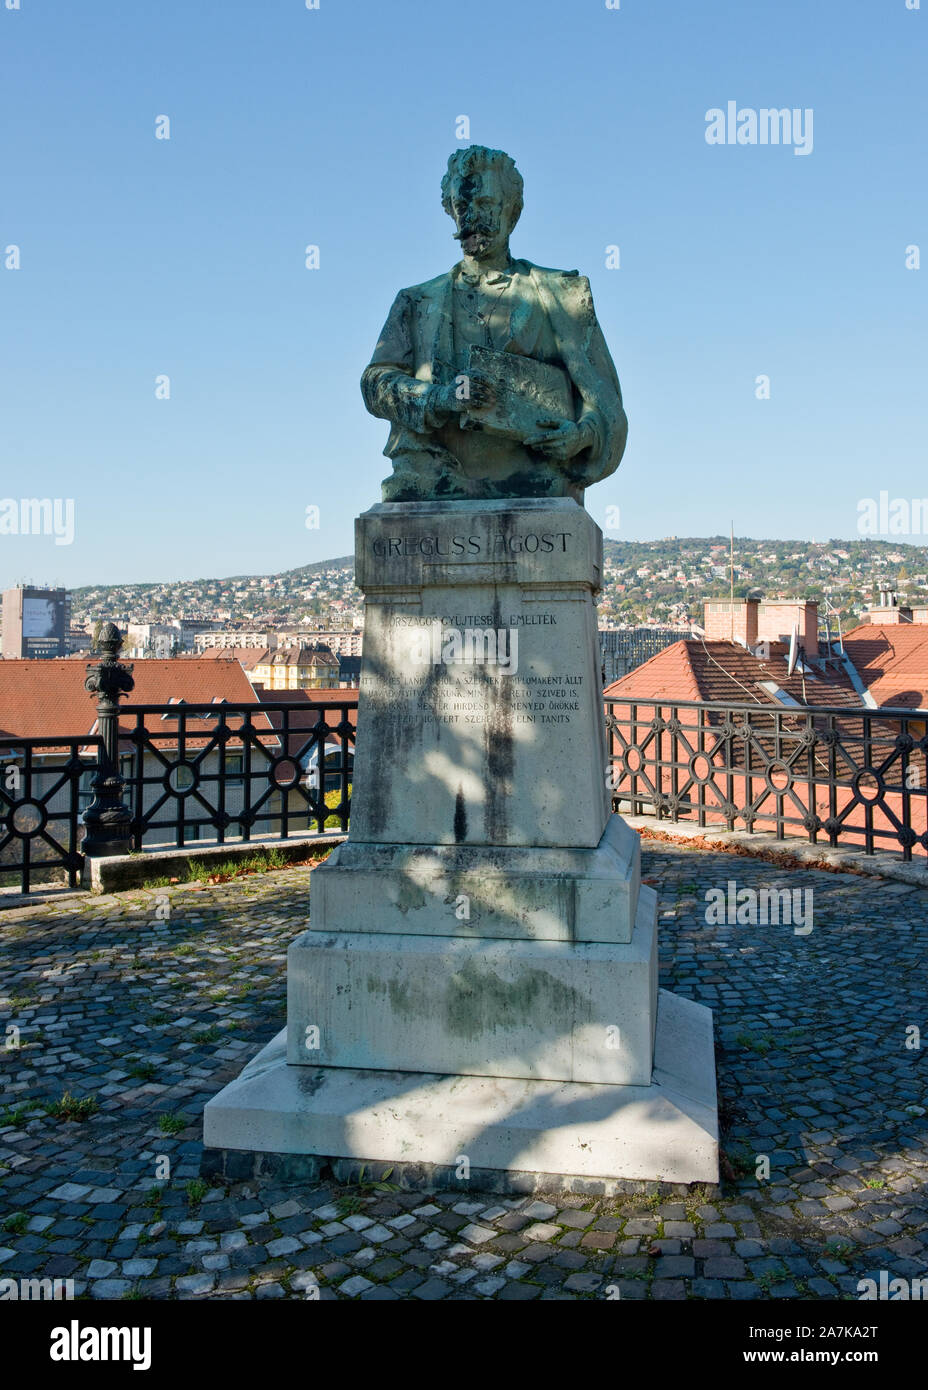 Statue of Agost Greguss. Professor, critic and writer. Located on road to Castle Hill District. Buda, Budapest Stock Photo